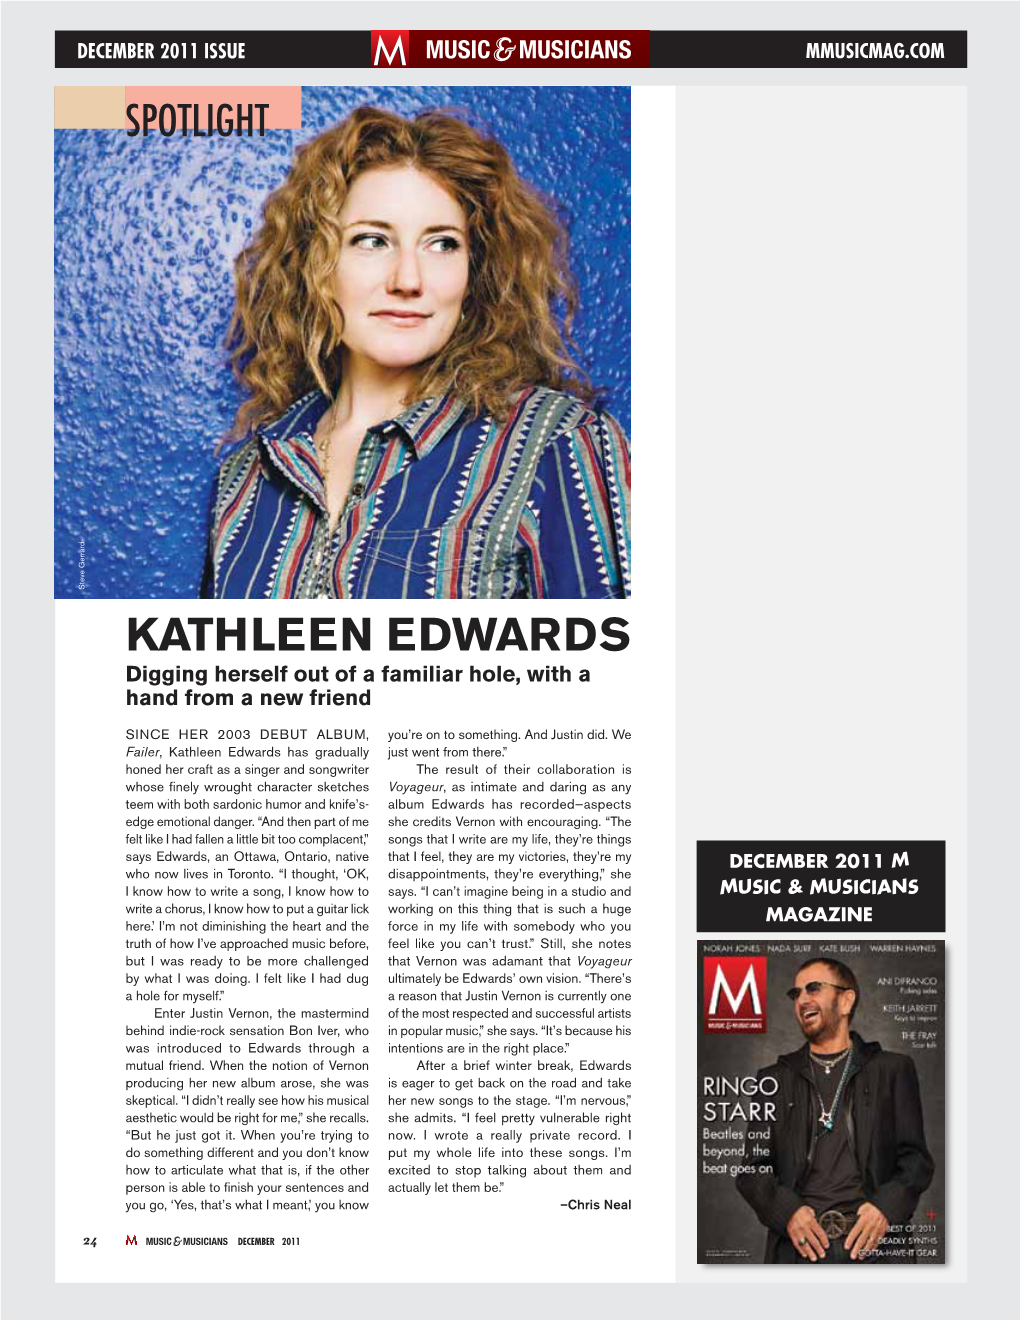 KATHLEEN EDWARDS M CONNECTS US Digging Herself out of a Familiar Hole, with a Hand from a New Friend